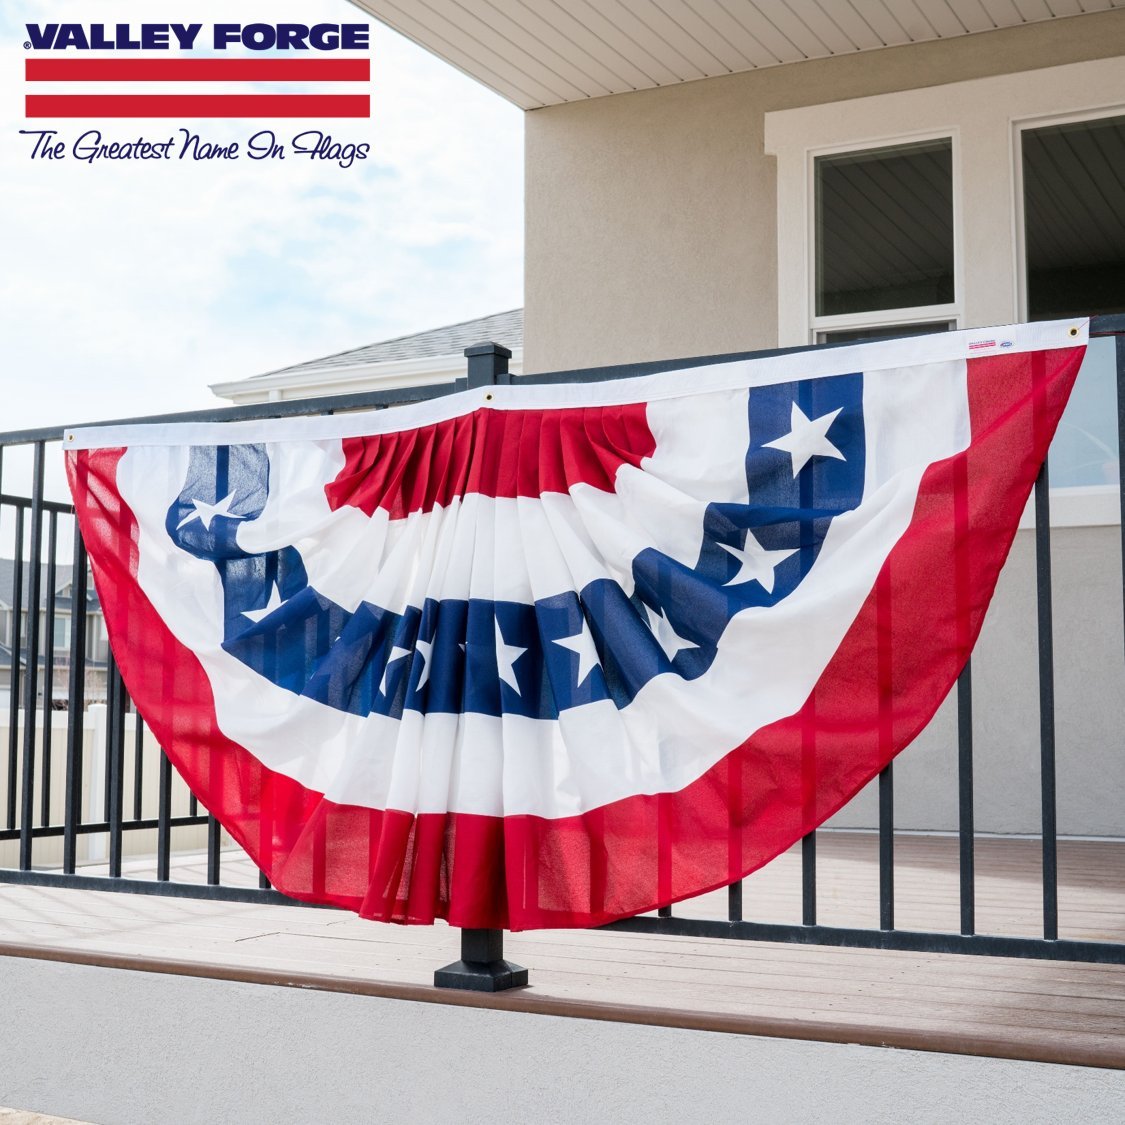 Valley Forge PFF-ST Printed Polycotton Pleated Fan Flag, Brass Grommets, 3' x 6'